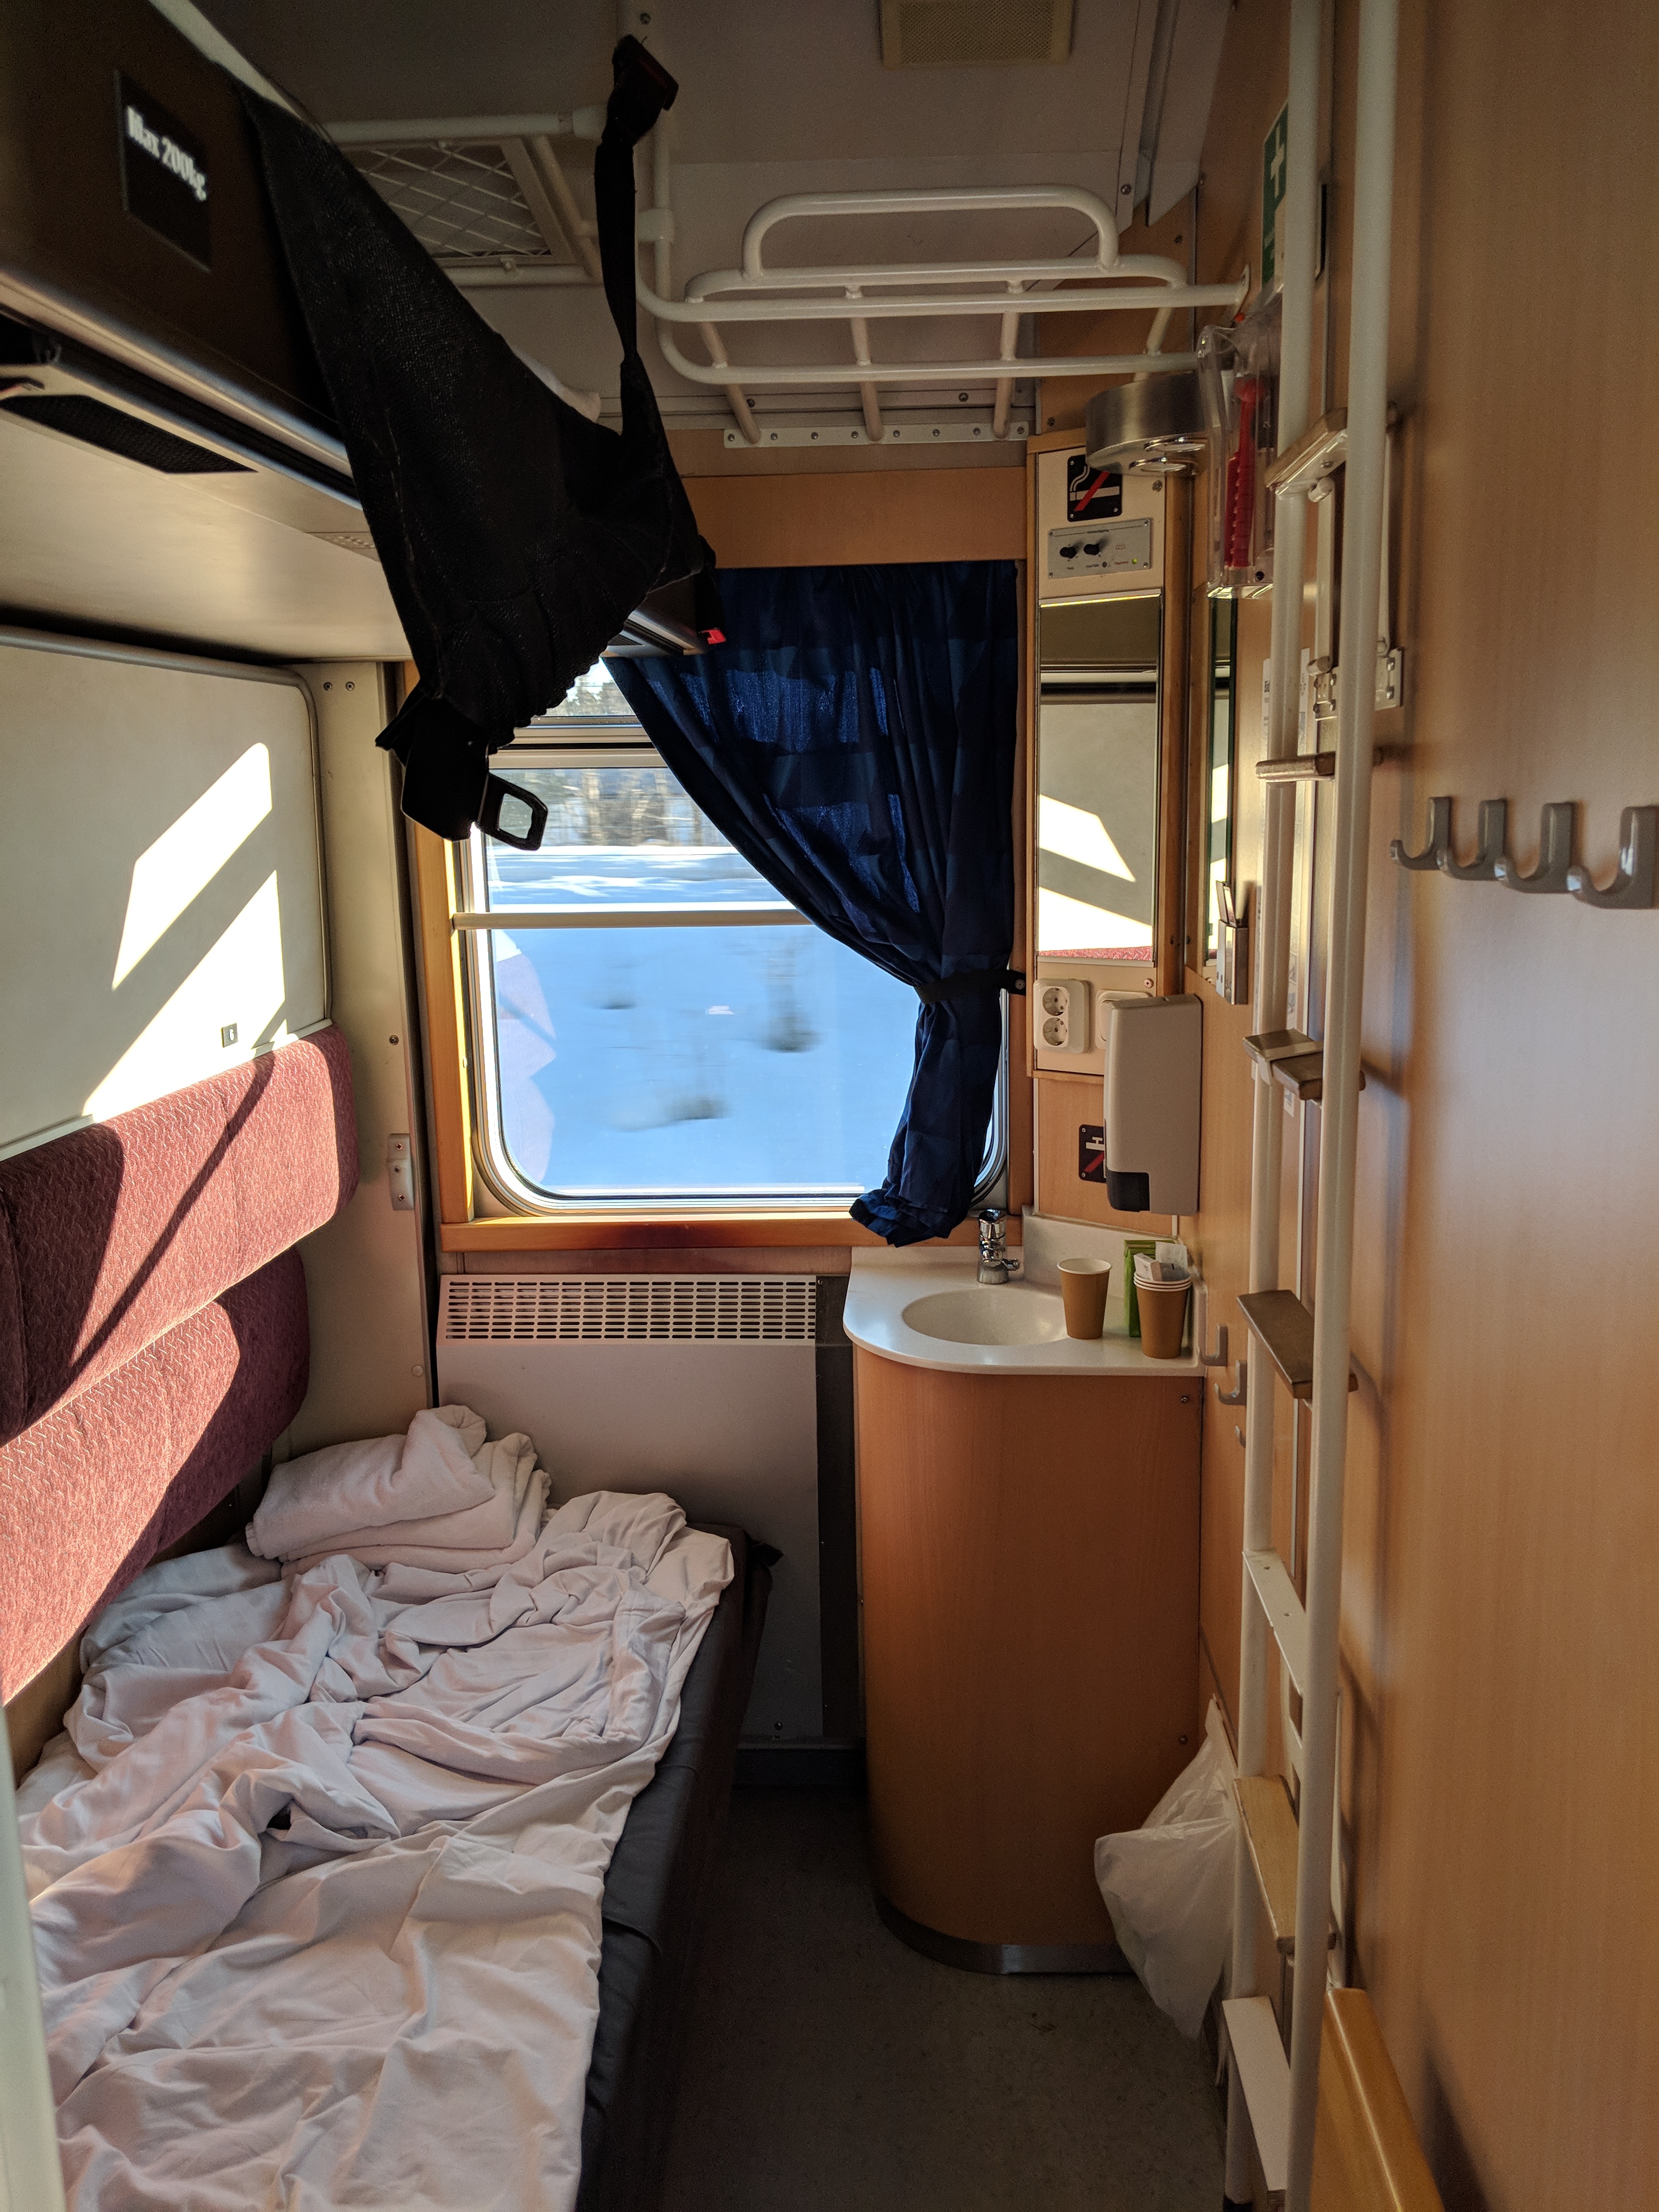 Eensy weensy 3-person train car. The board above the bottom bunk folds out to hold a 3rd person.